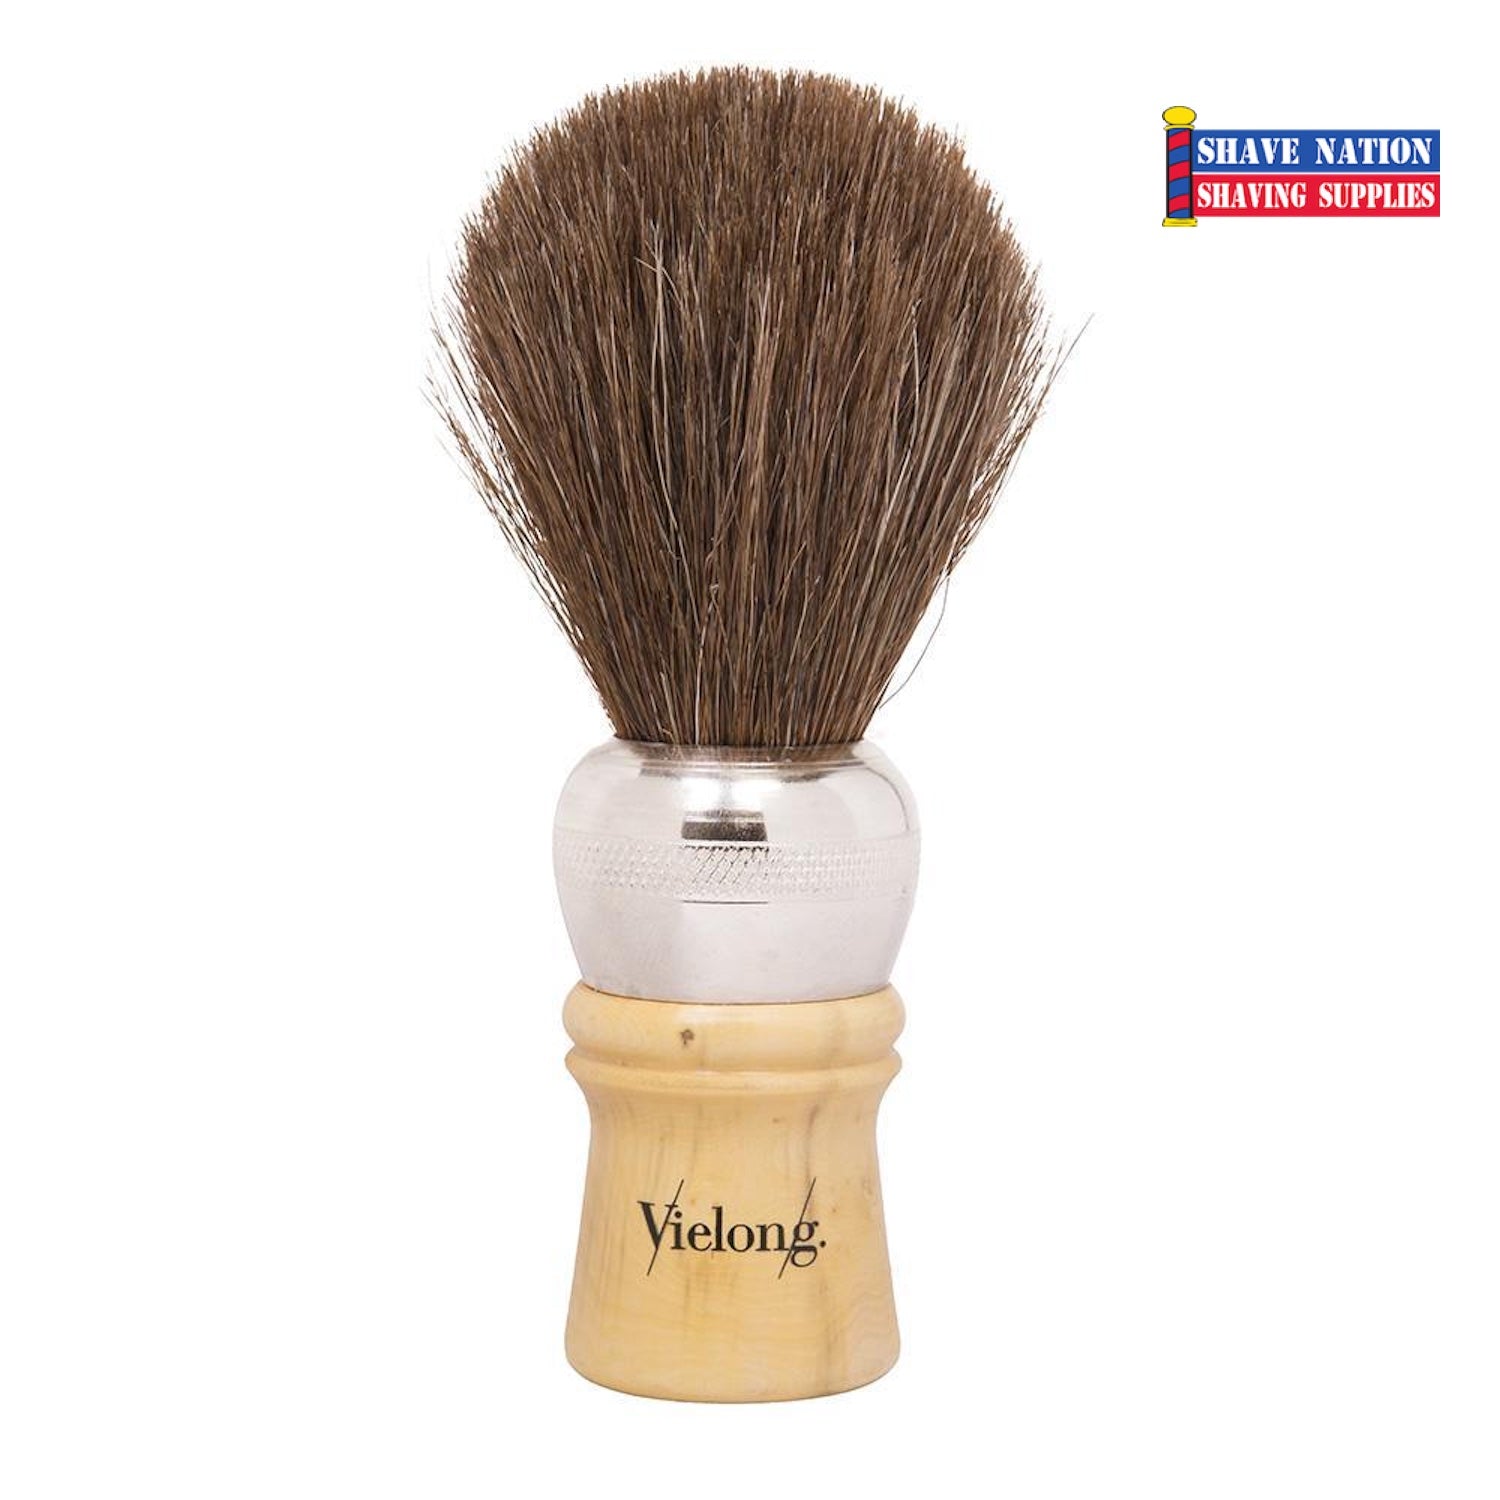 Professional's Choice Small Oval Wooden Horse Hair Brush – Leanin